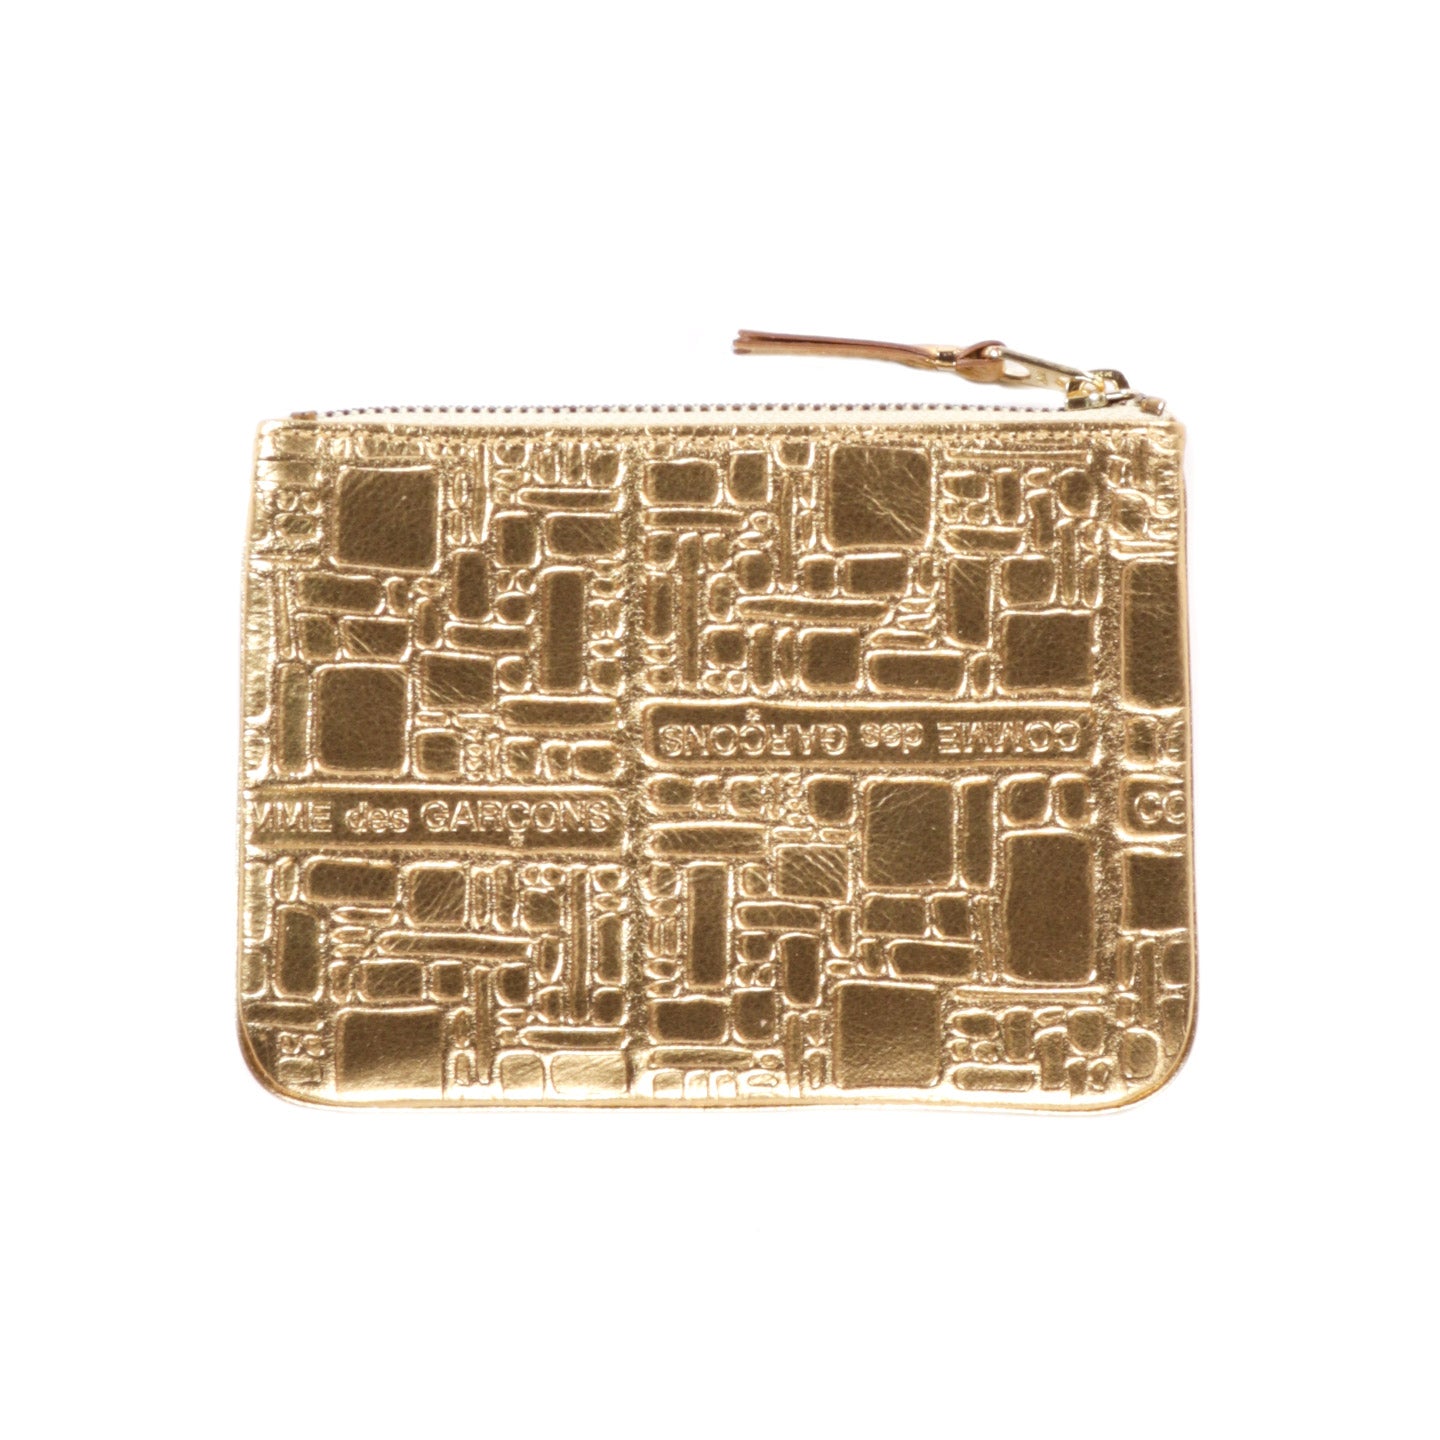 COMME DES GARCONS SA8100 EMBOSSED LOGOTYPE ZIP WALLET GOLD